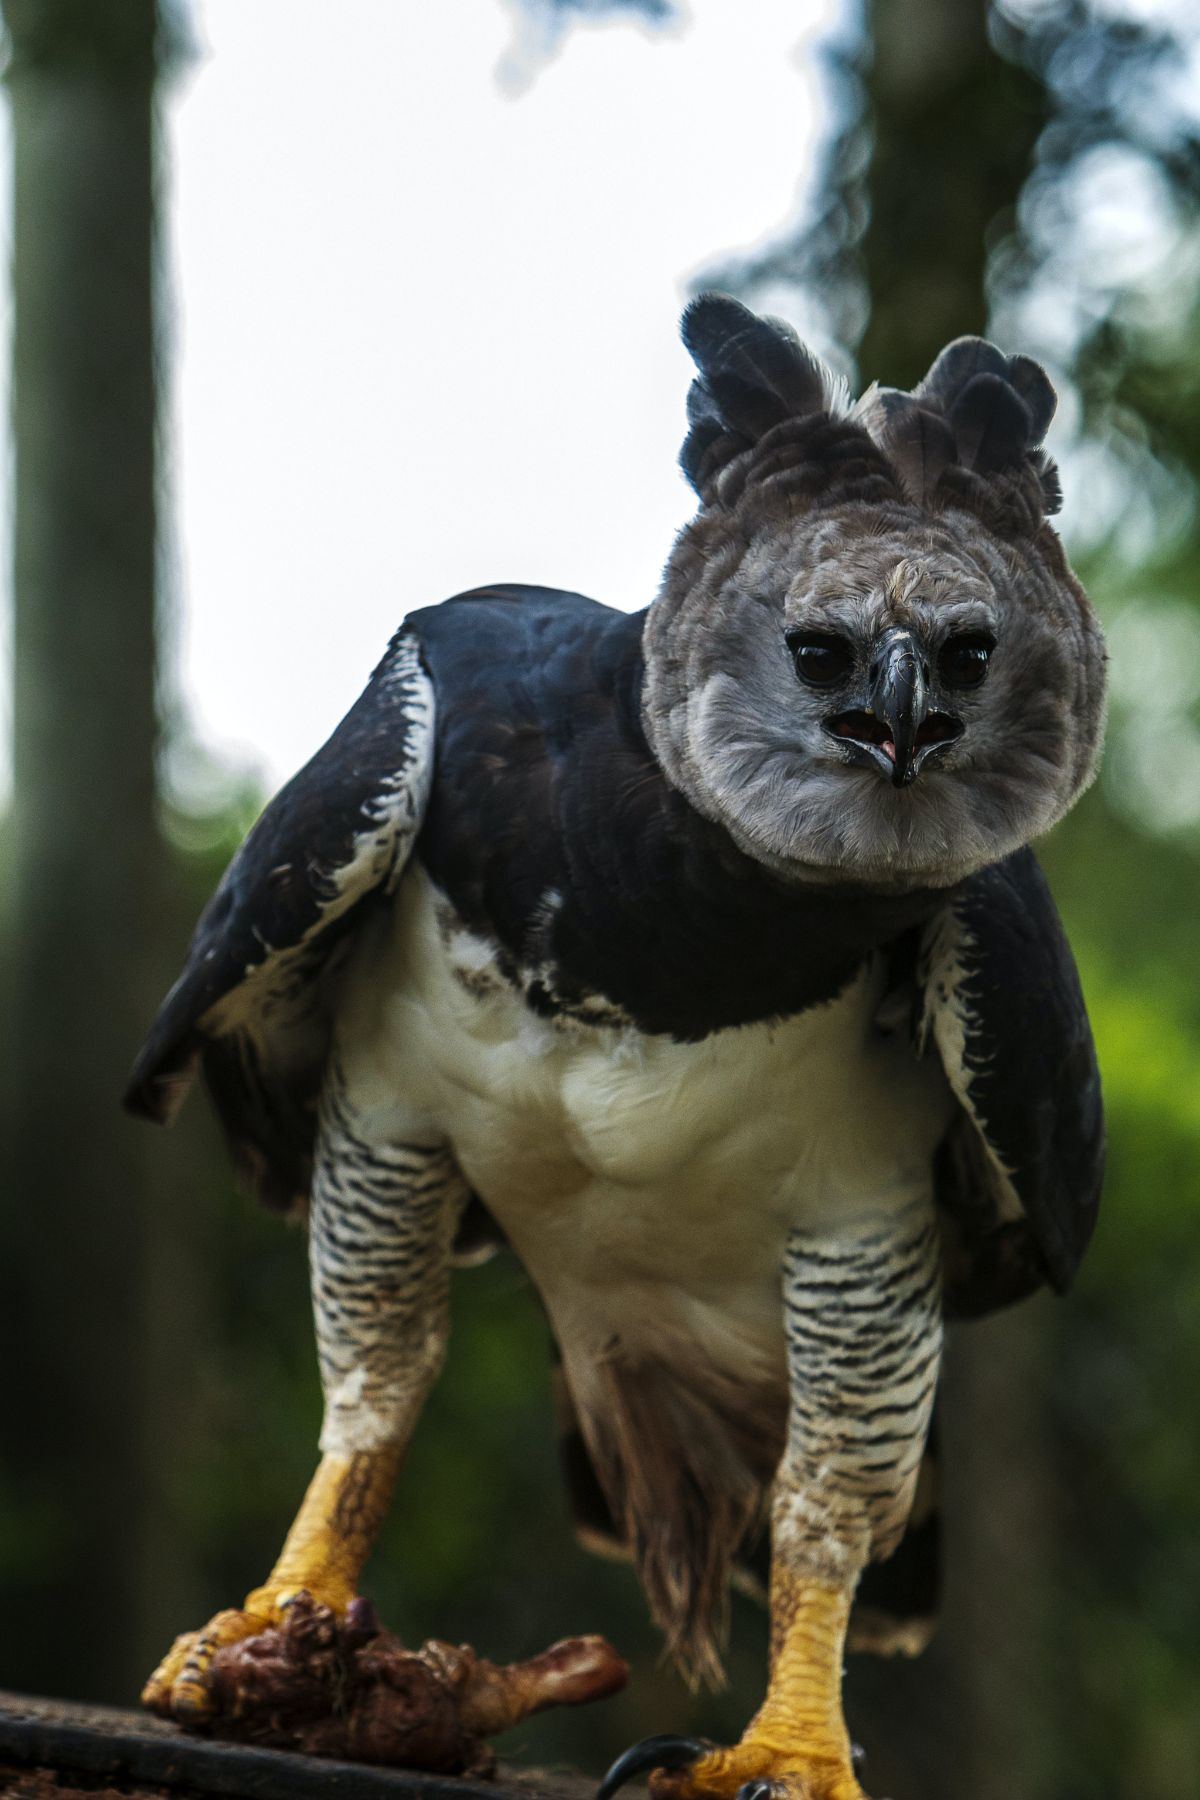 Bird alive! What the devil is a harpy eagle?